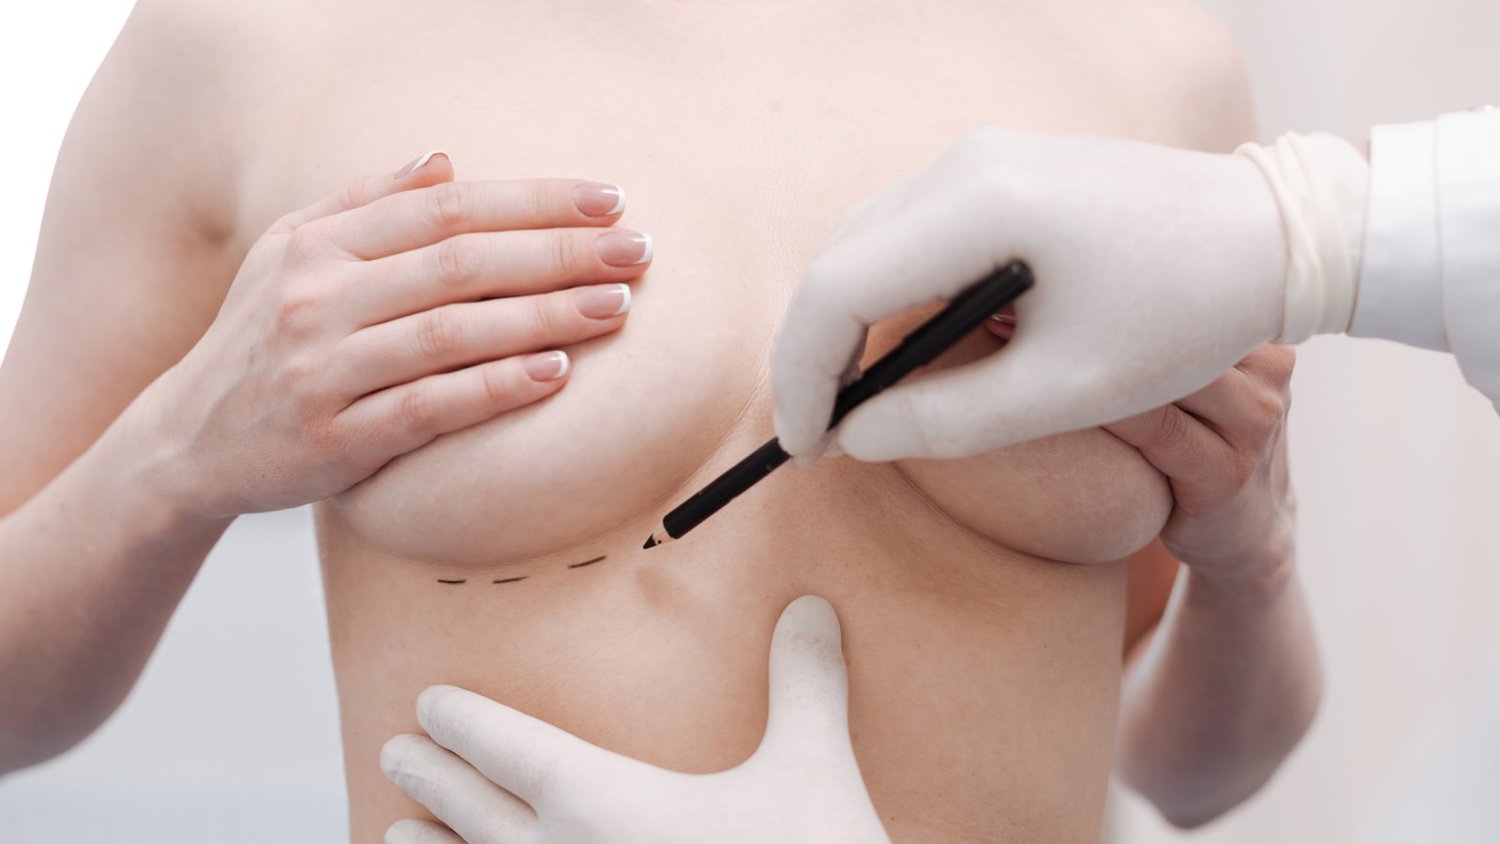 Breast shaping